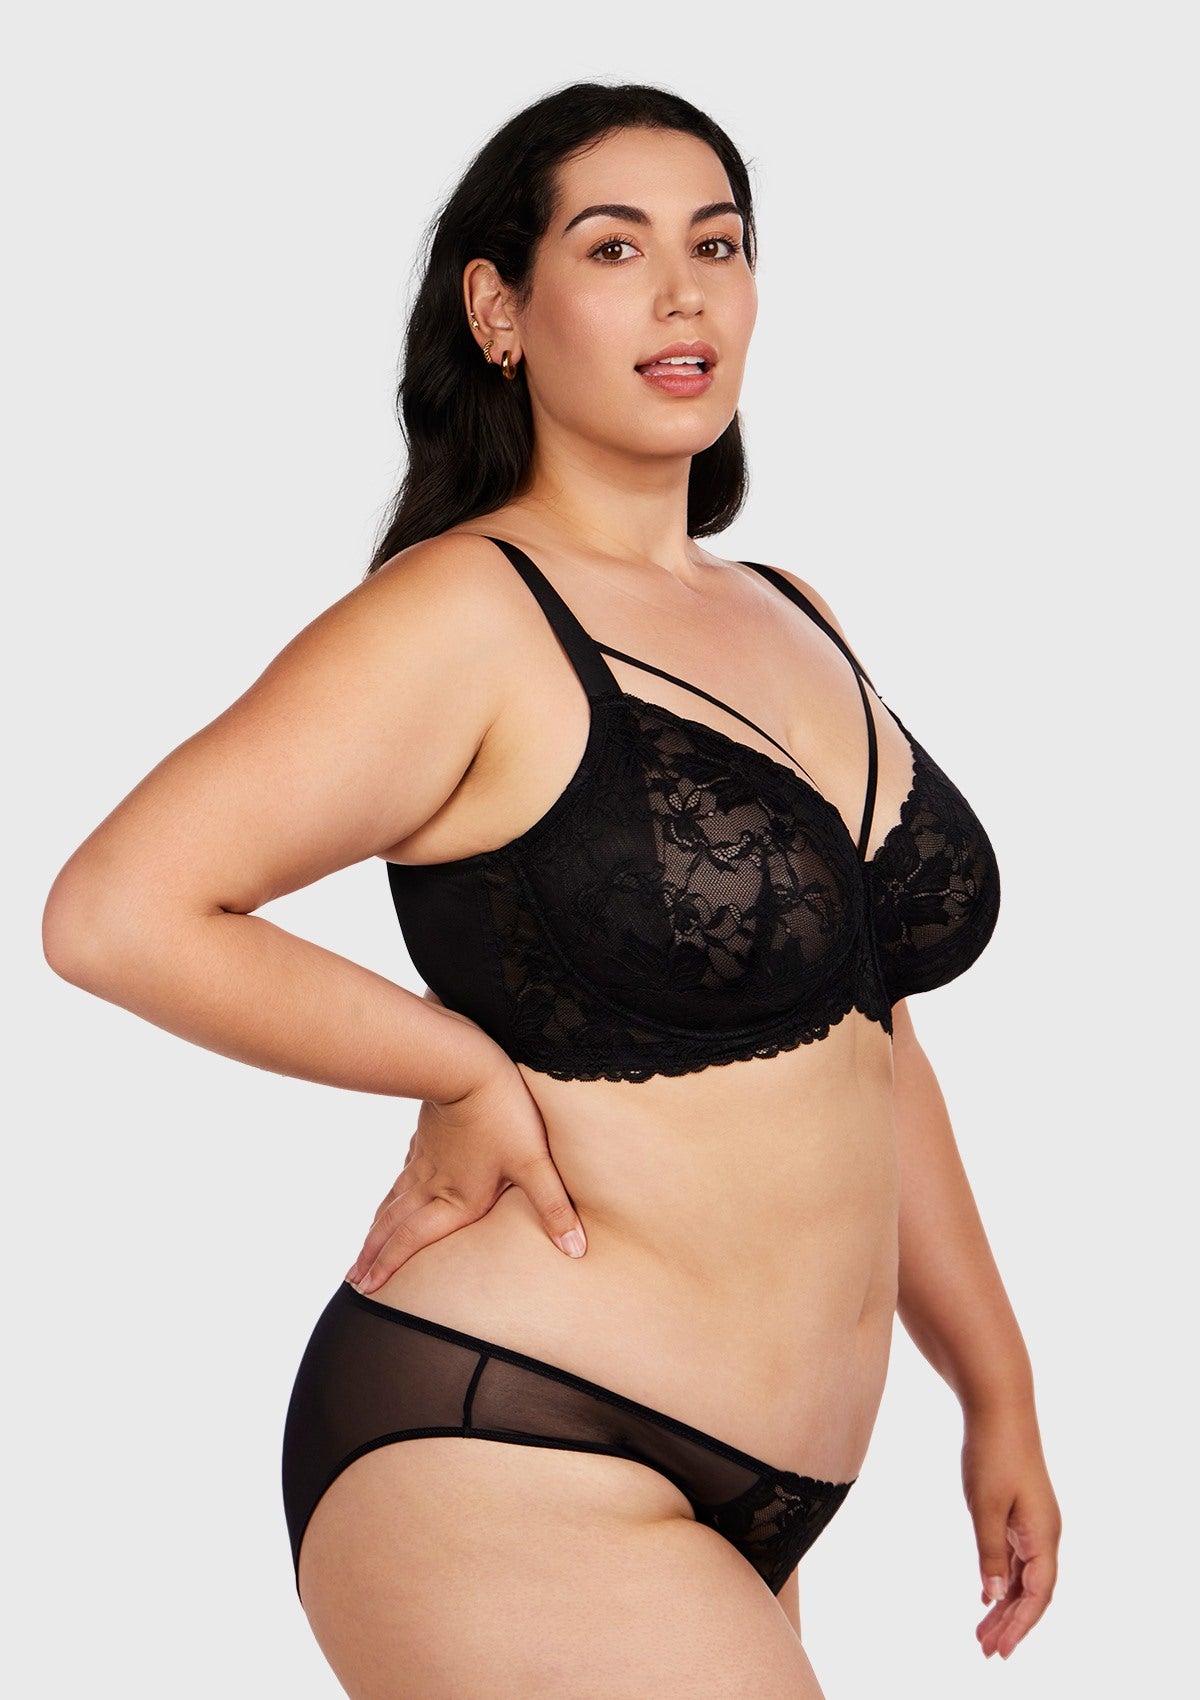 HSIA Pretty In Petals Bra - Plus Size Lingerie For Comfrot And Support - Black / 46 / D